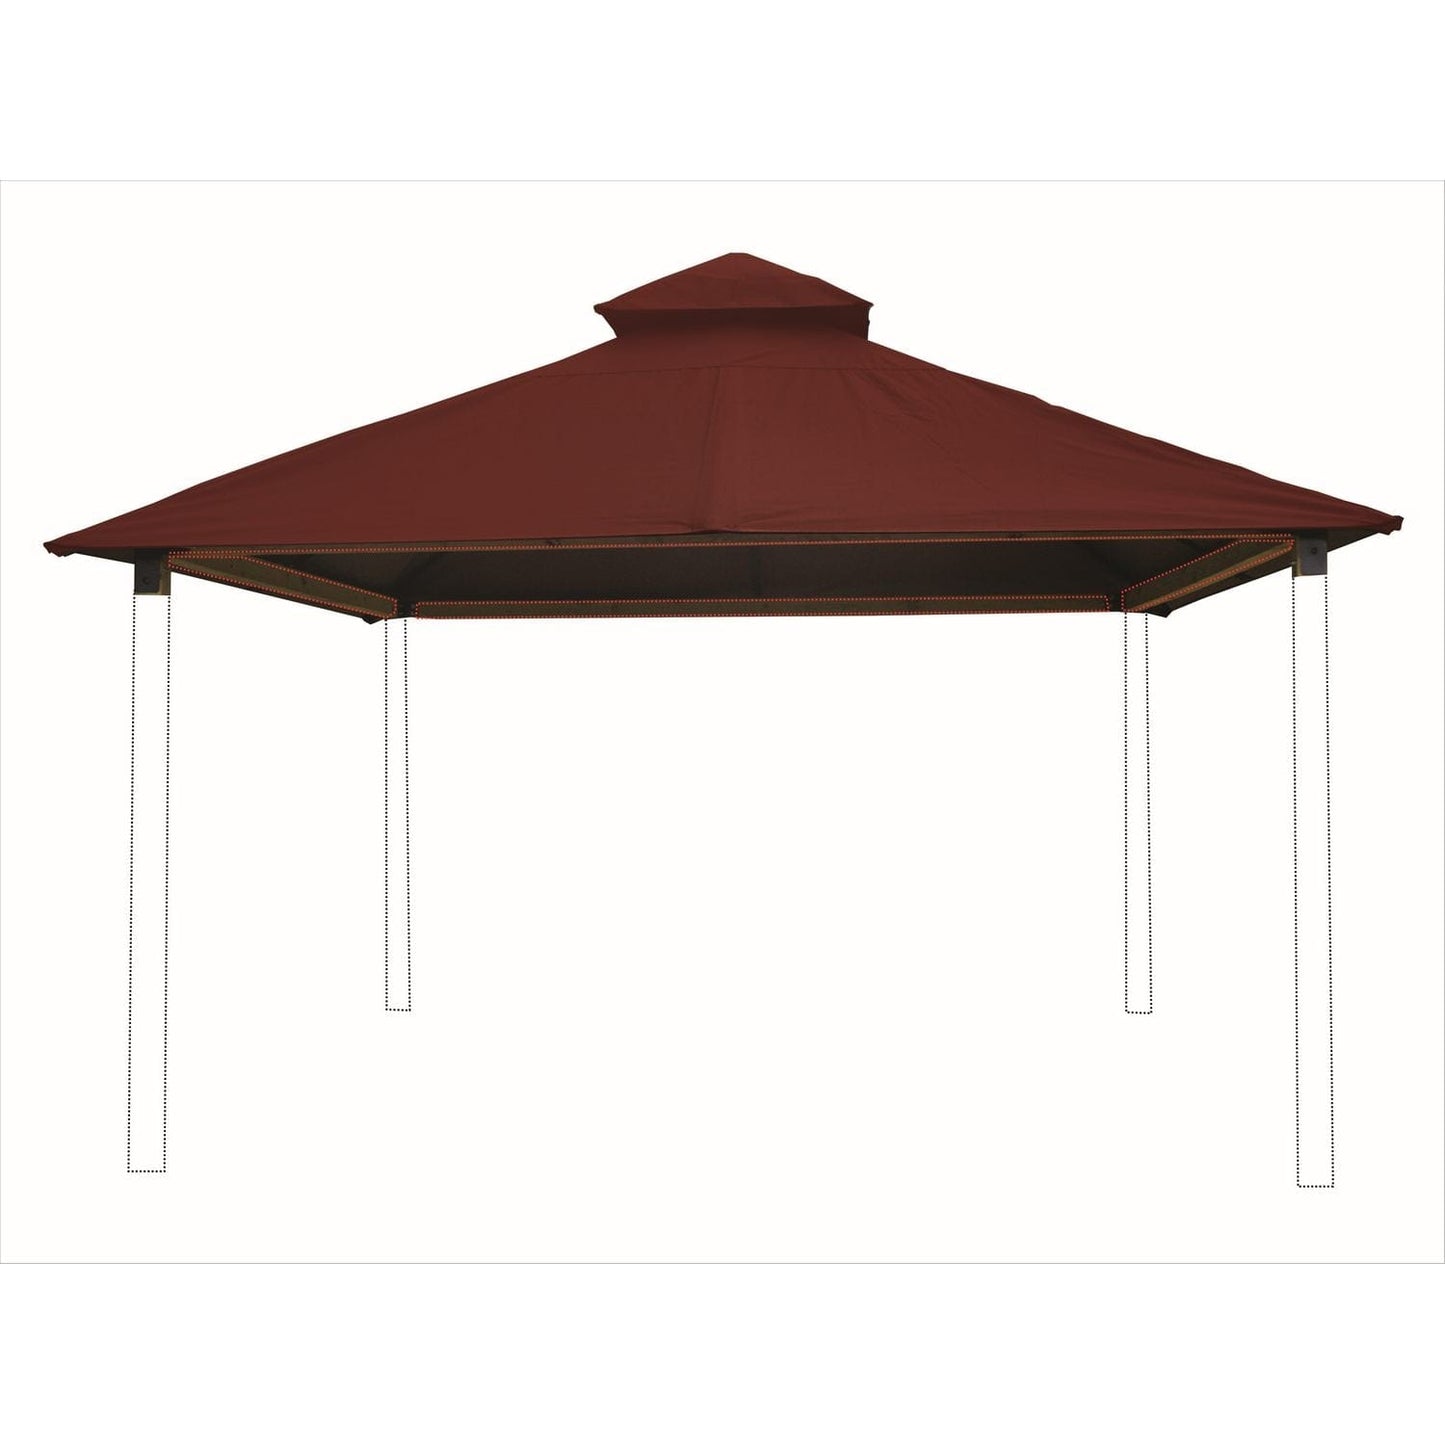 Riverstone Industries Soft Top Gazebos 12FT X 12FT Riverstone | ACACIA Gazebo Roof Framing and Mounting Kit With OutDURA Canopy - Terracotta AGOK12-TERRACOTTA